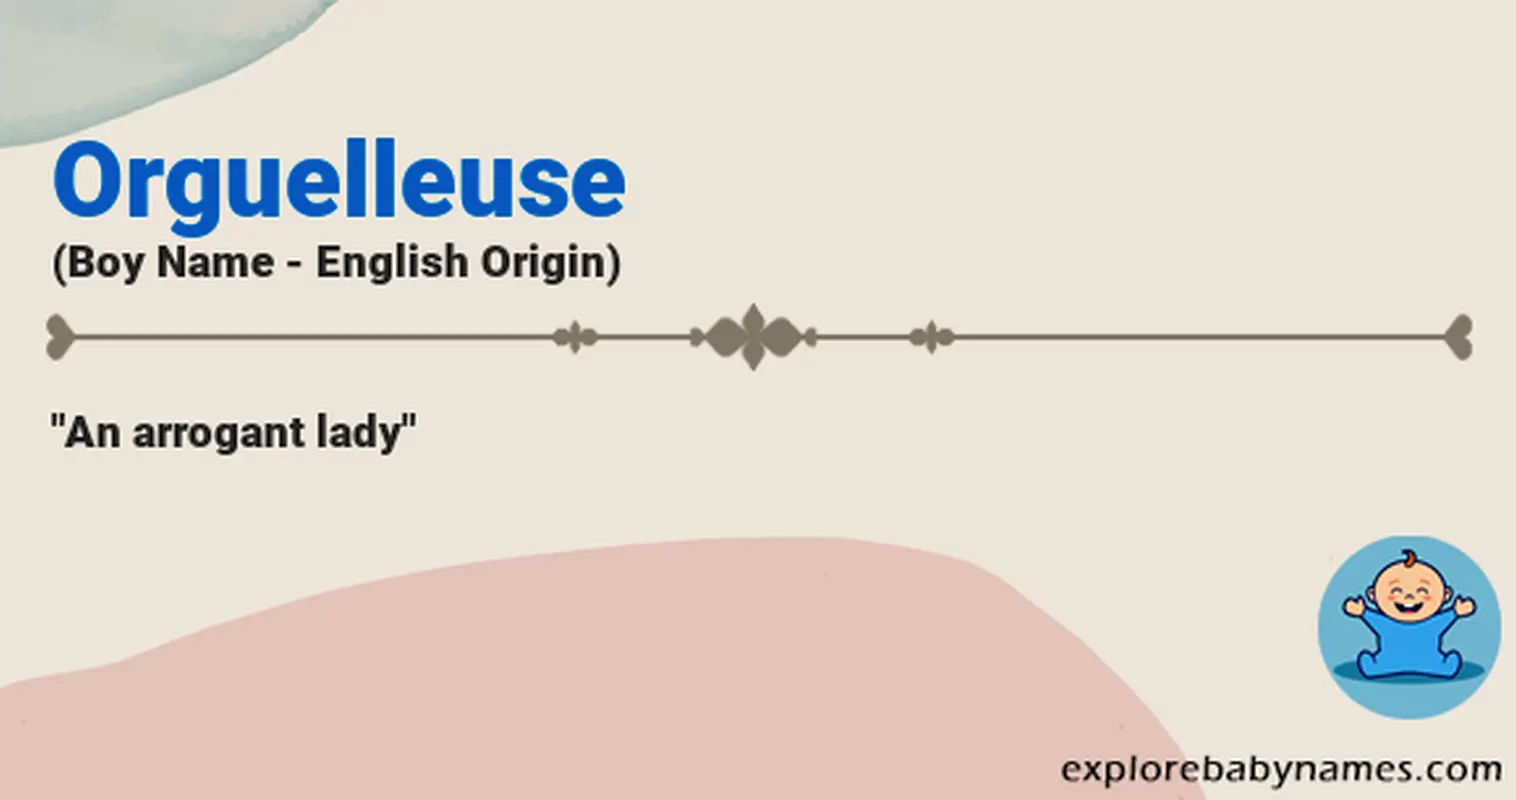 Meaning of Orguelleuse